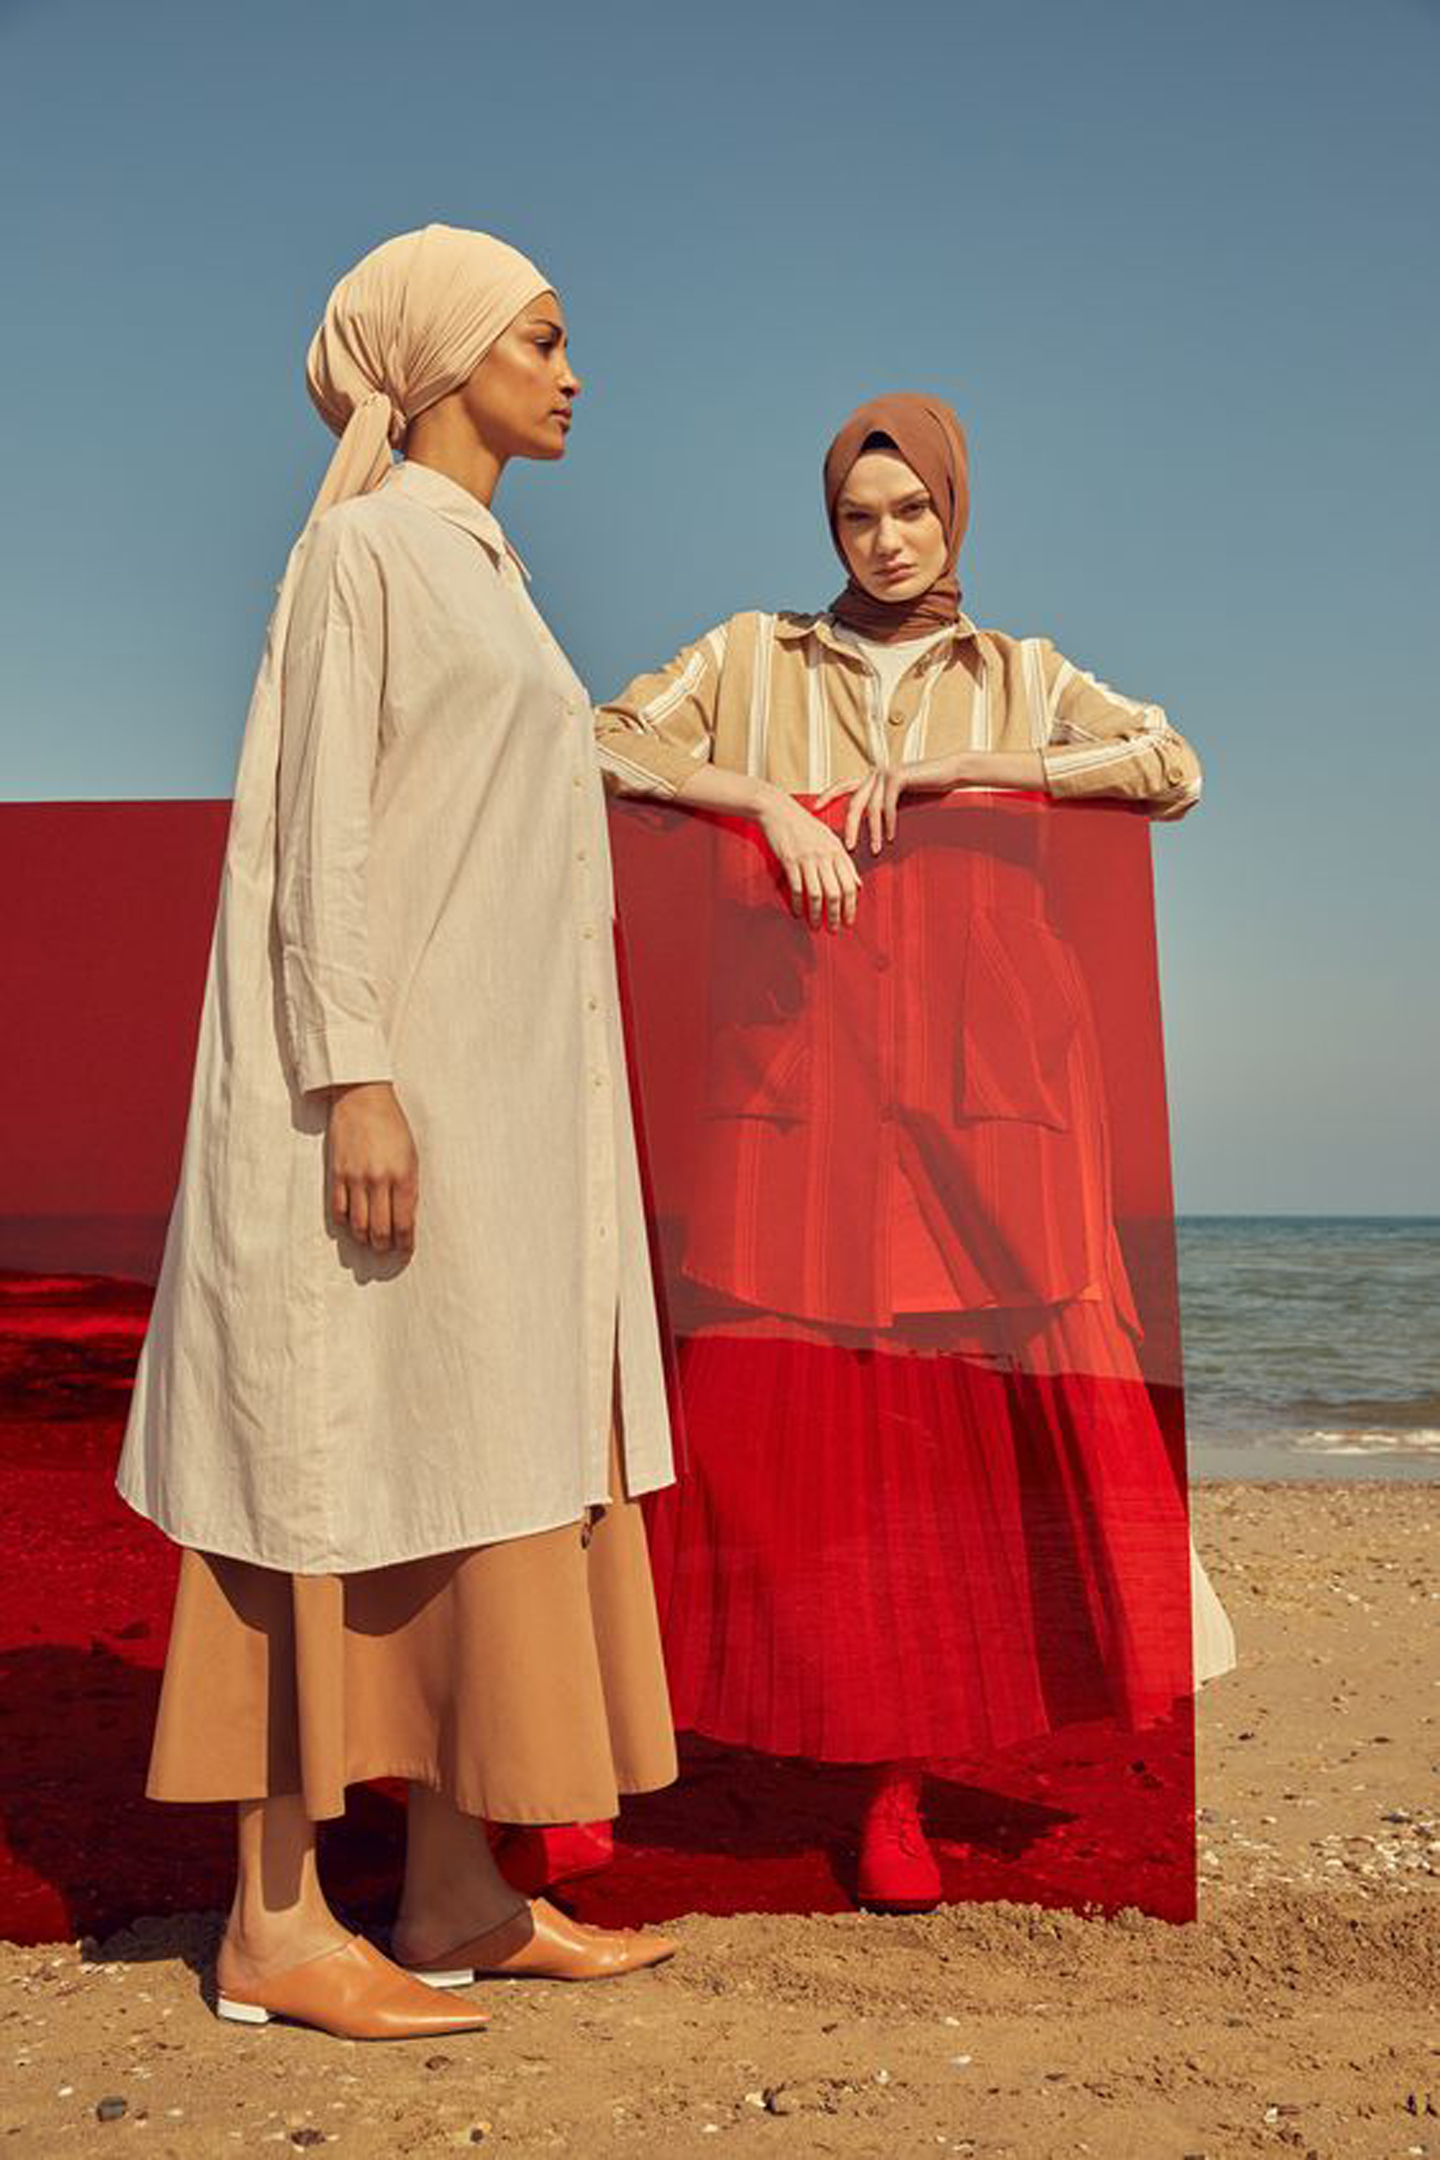 An editorial campaign by modest fashion brand Modanisa